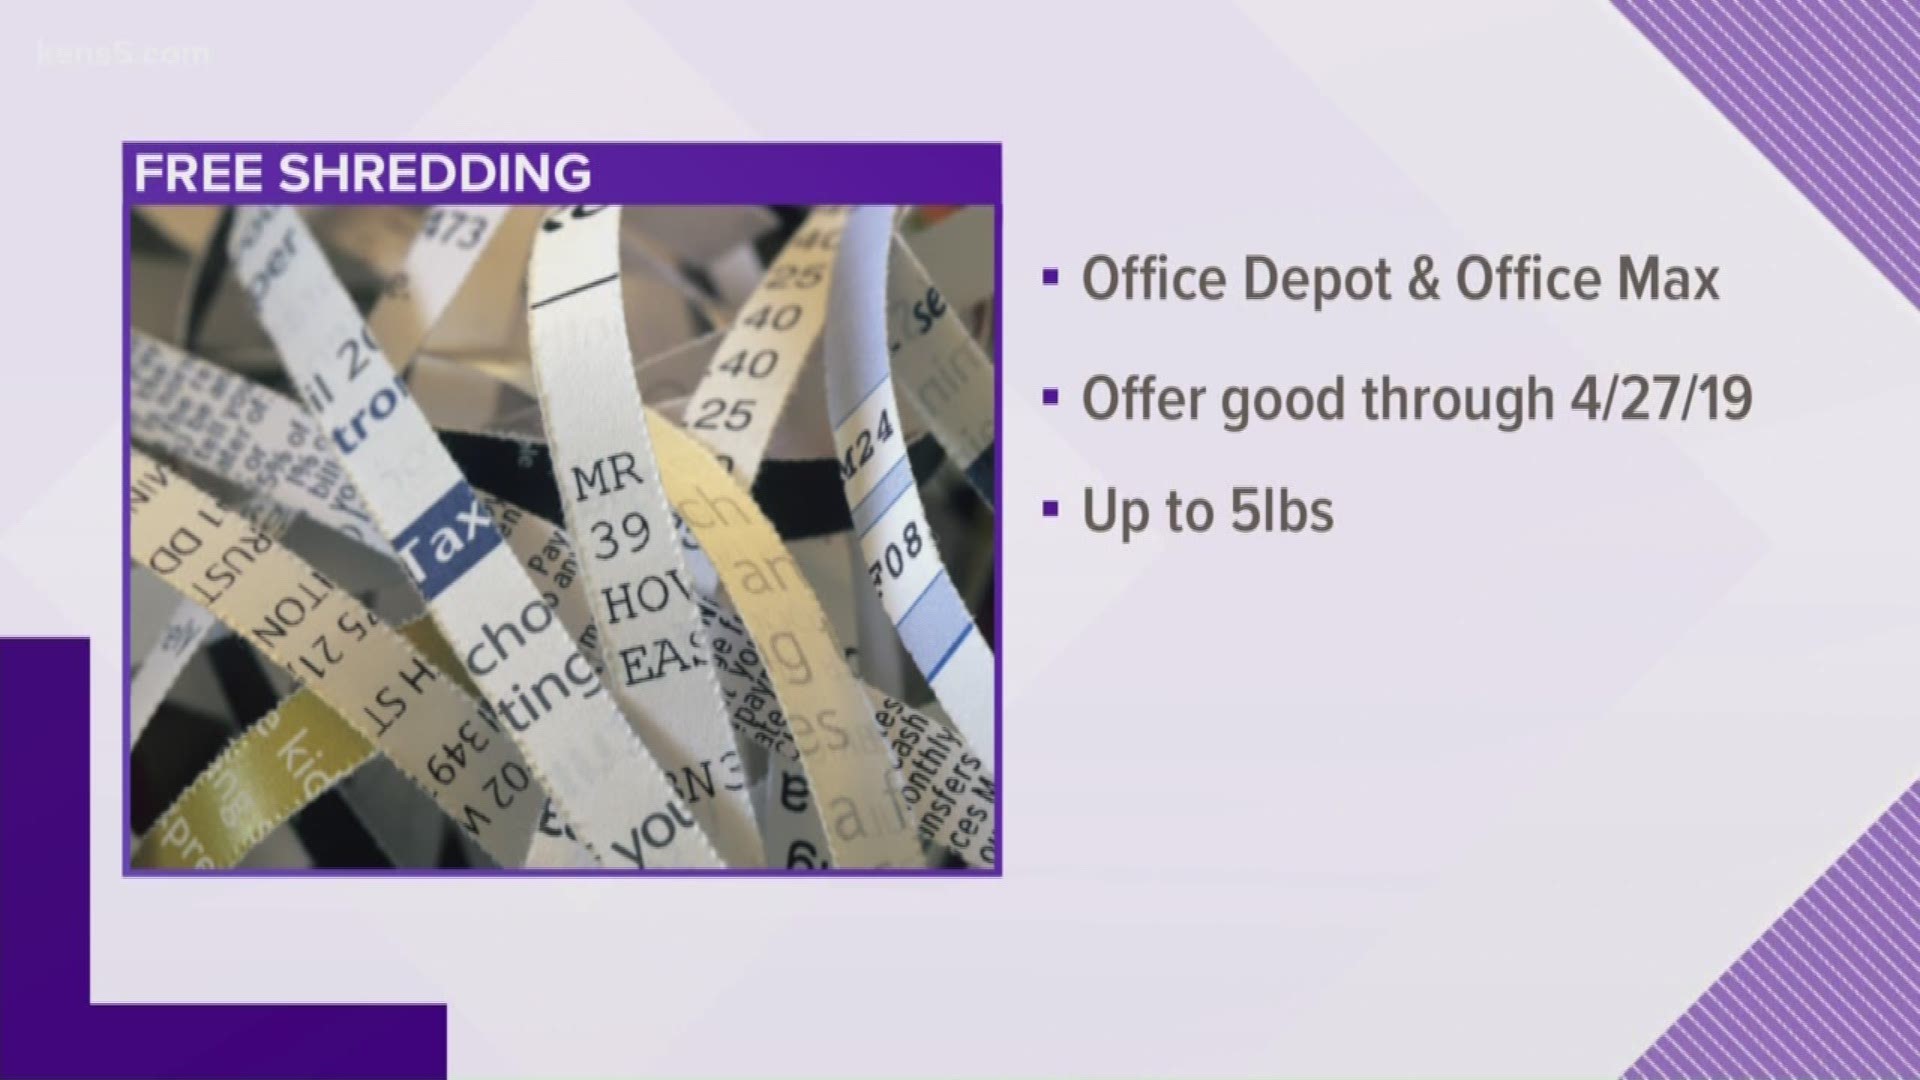 Free shredding service offered at Office Depot and OfficeMax